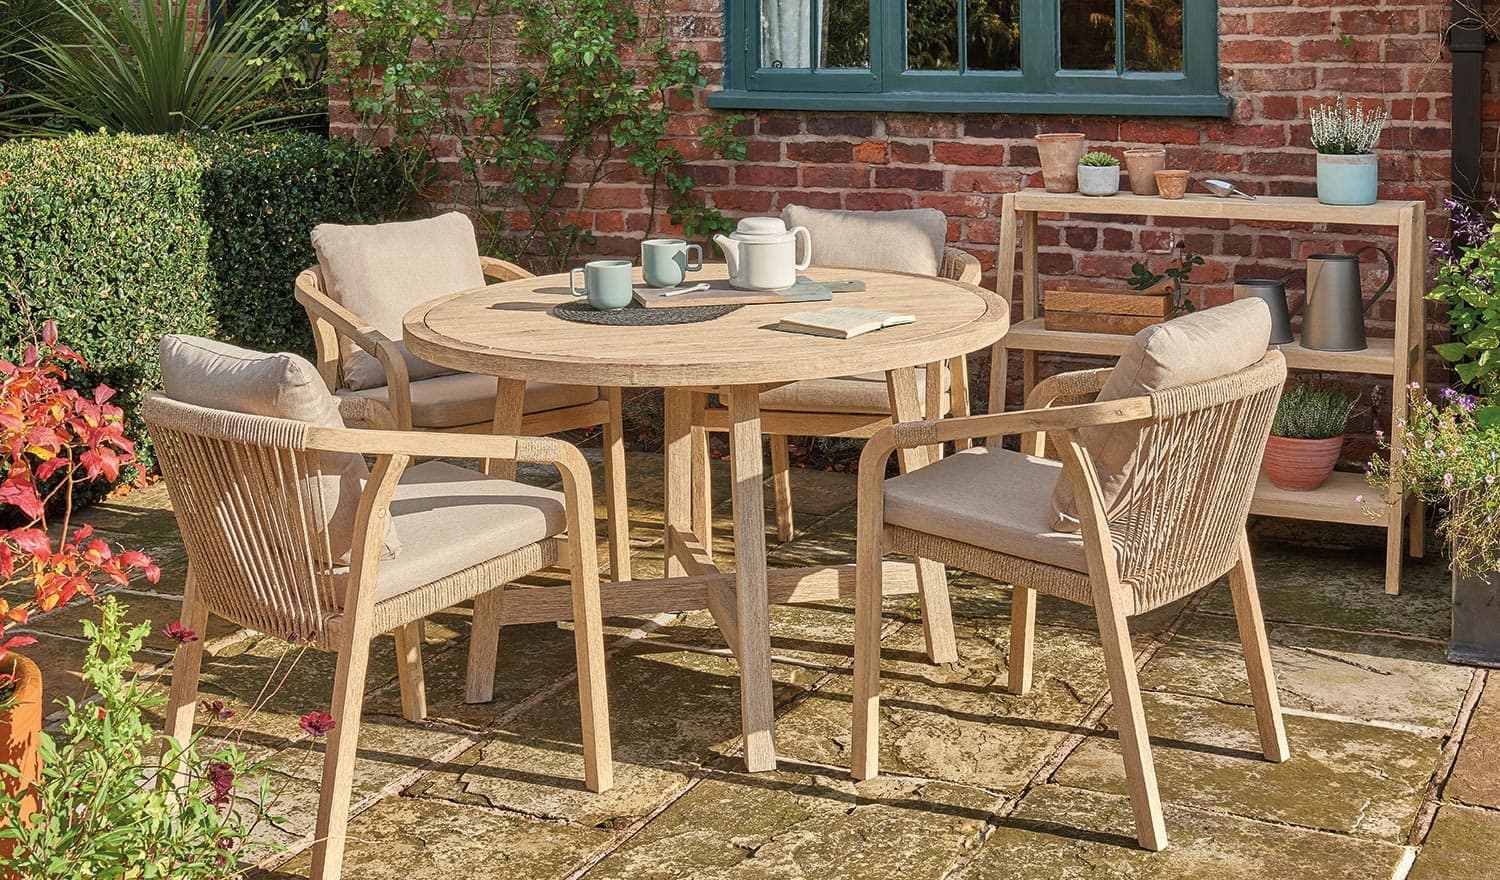 Cora 120cm Round Dining Table 4 Seater, Round Wooden Garden Table And Chairs Set Of 4